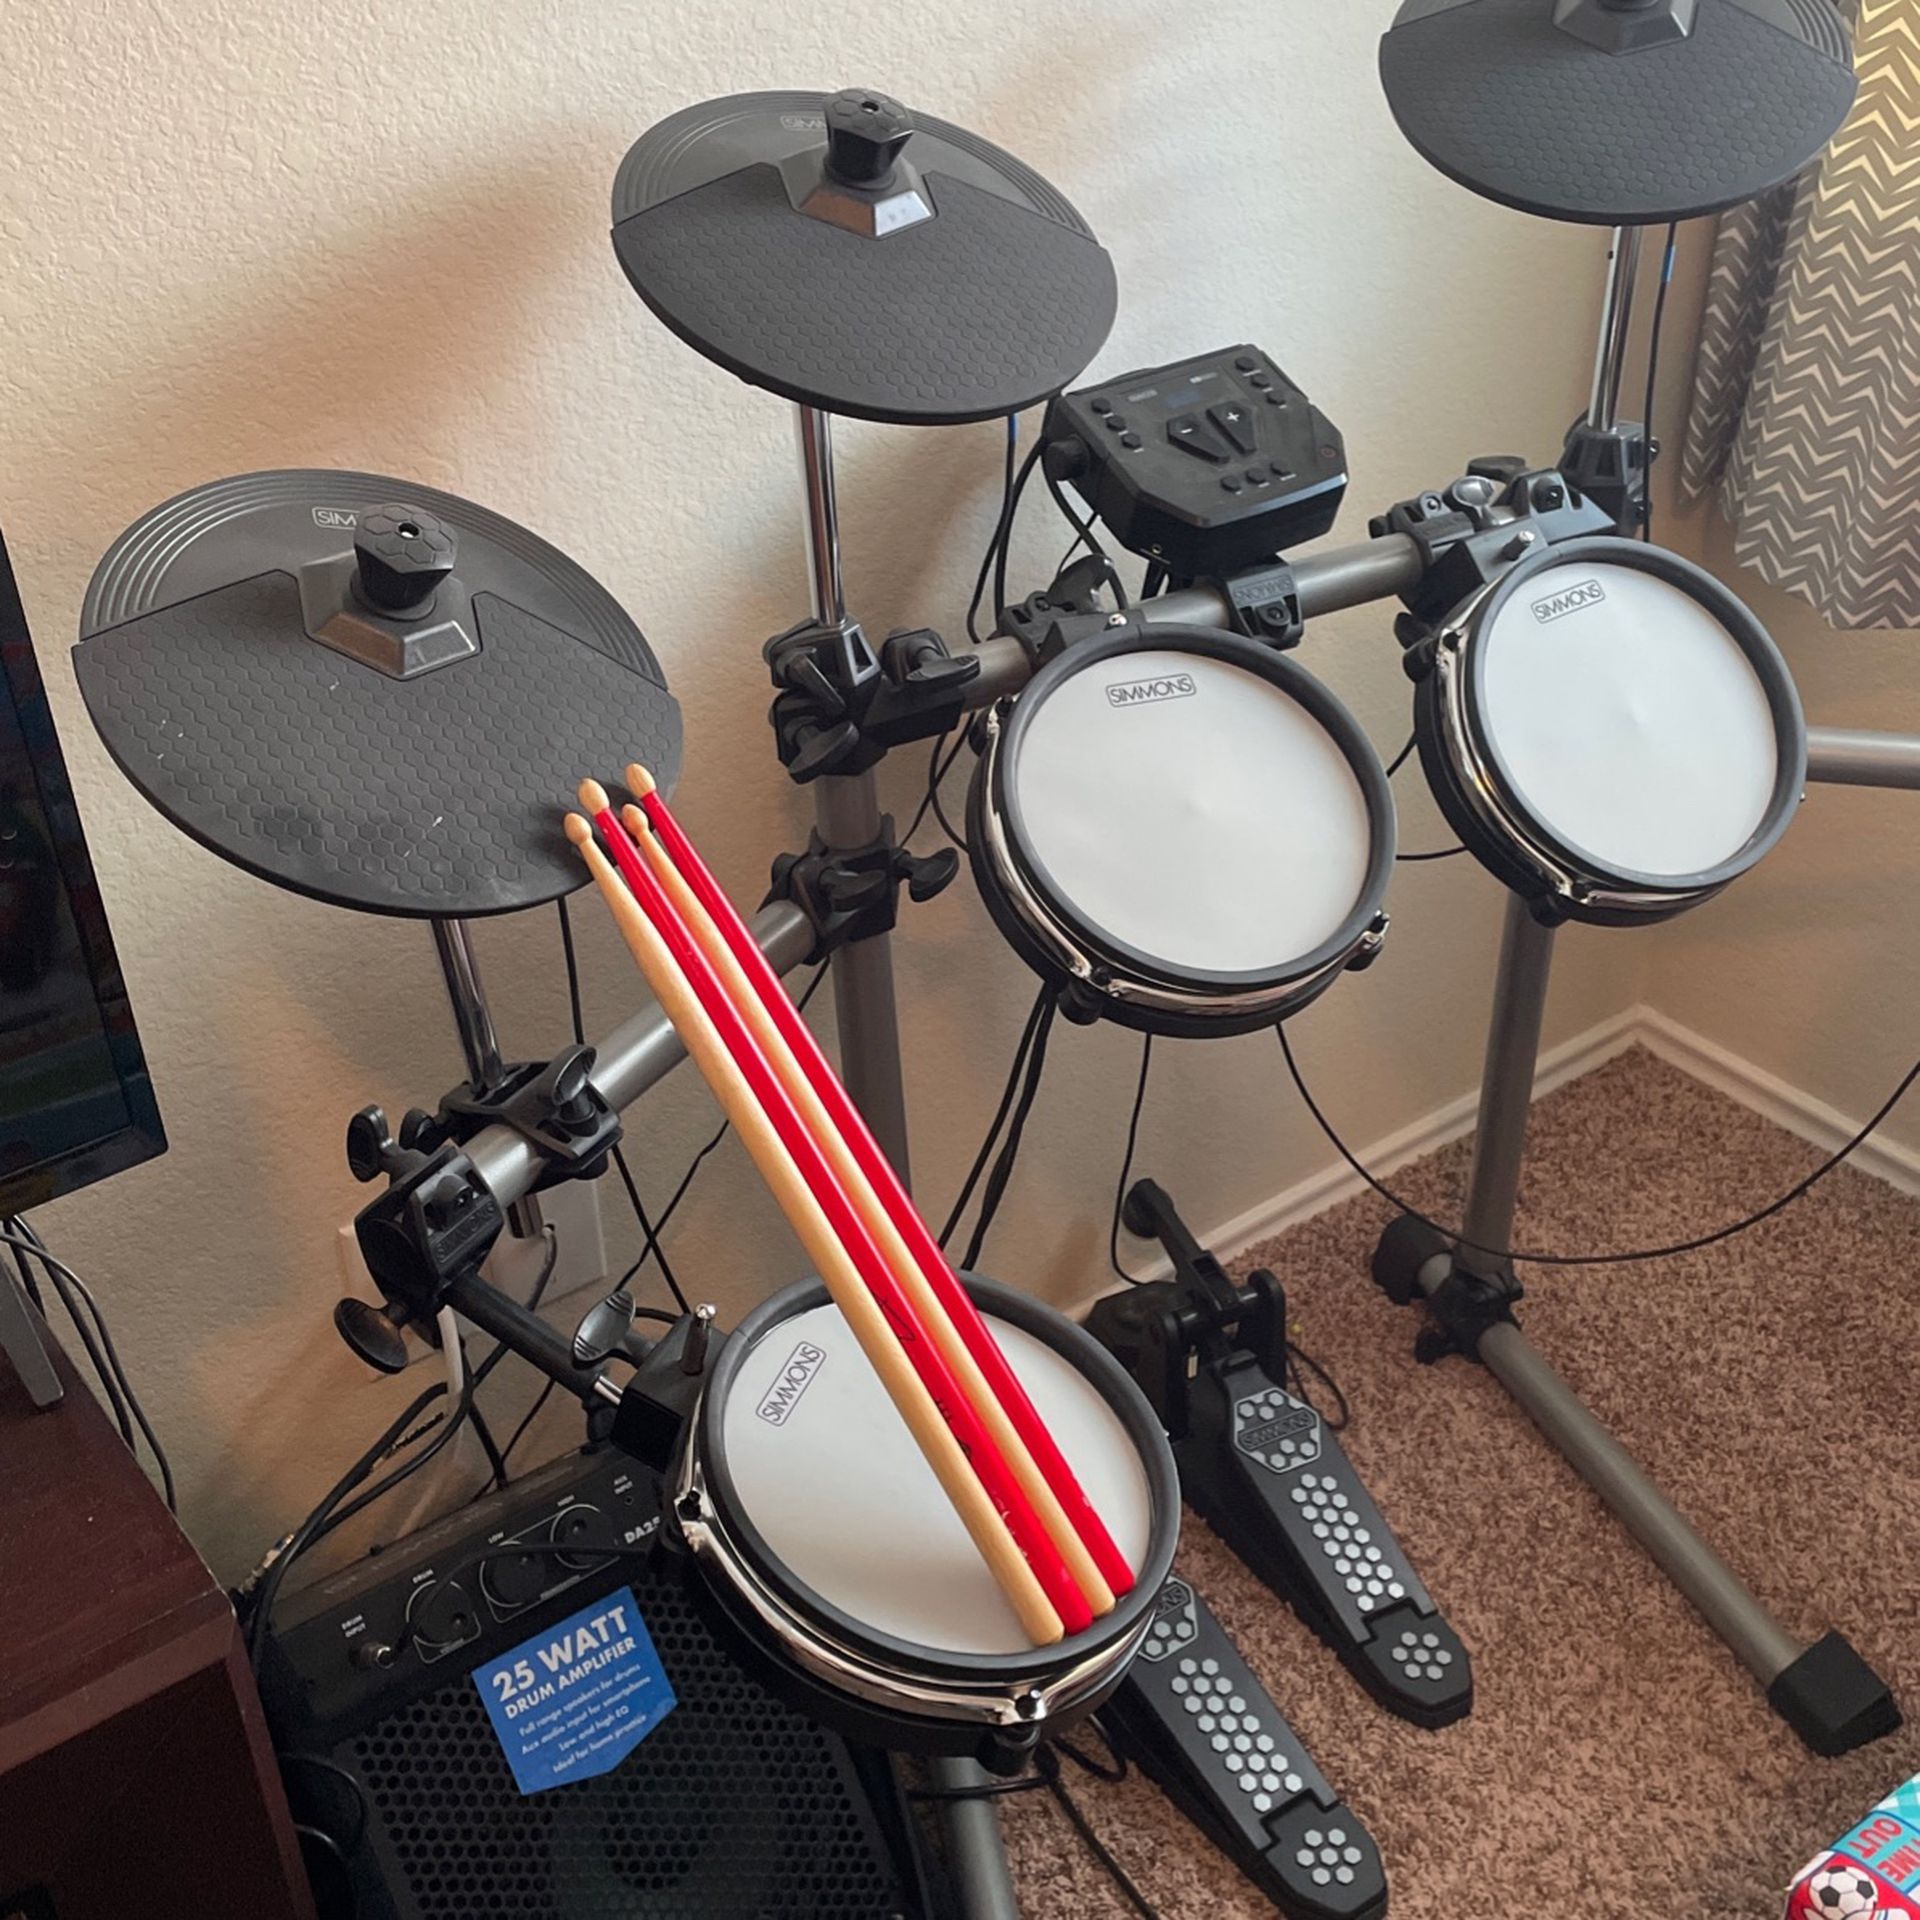 Electric Drum Set Simmons with Drum Amp